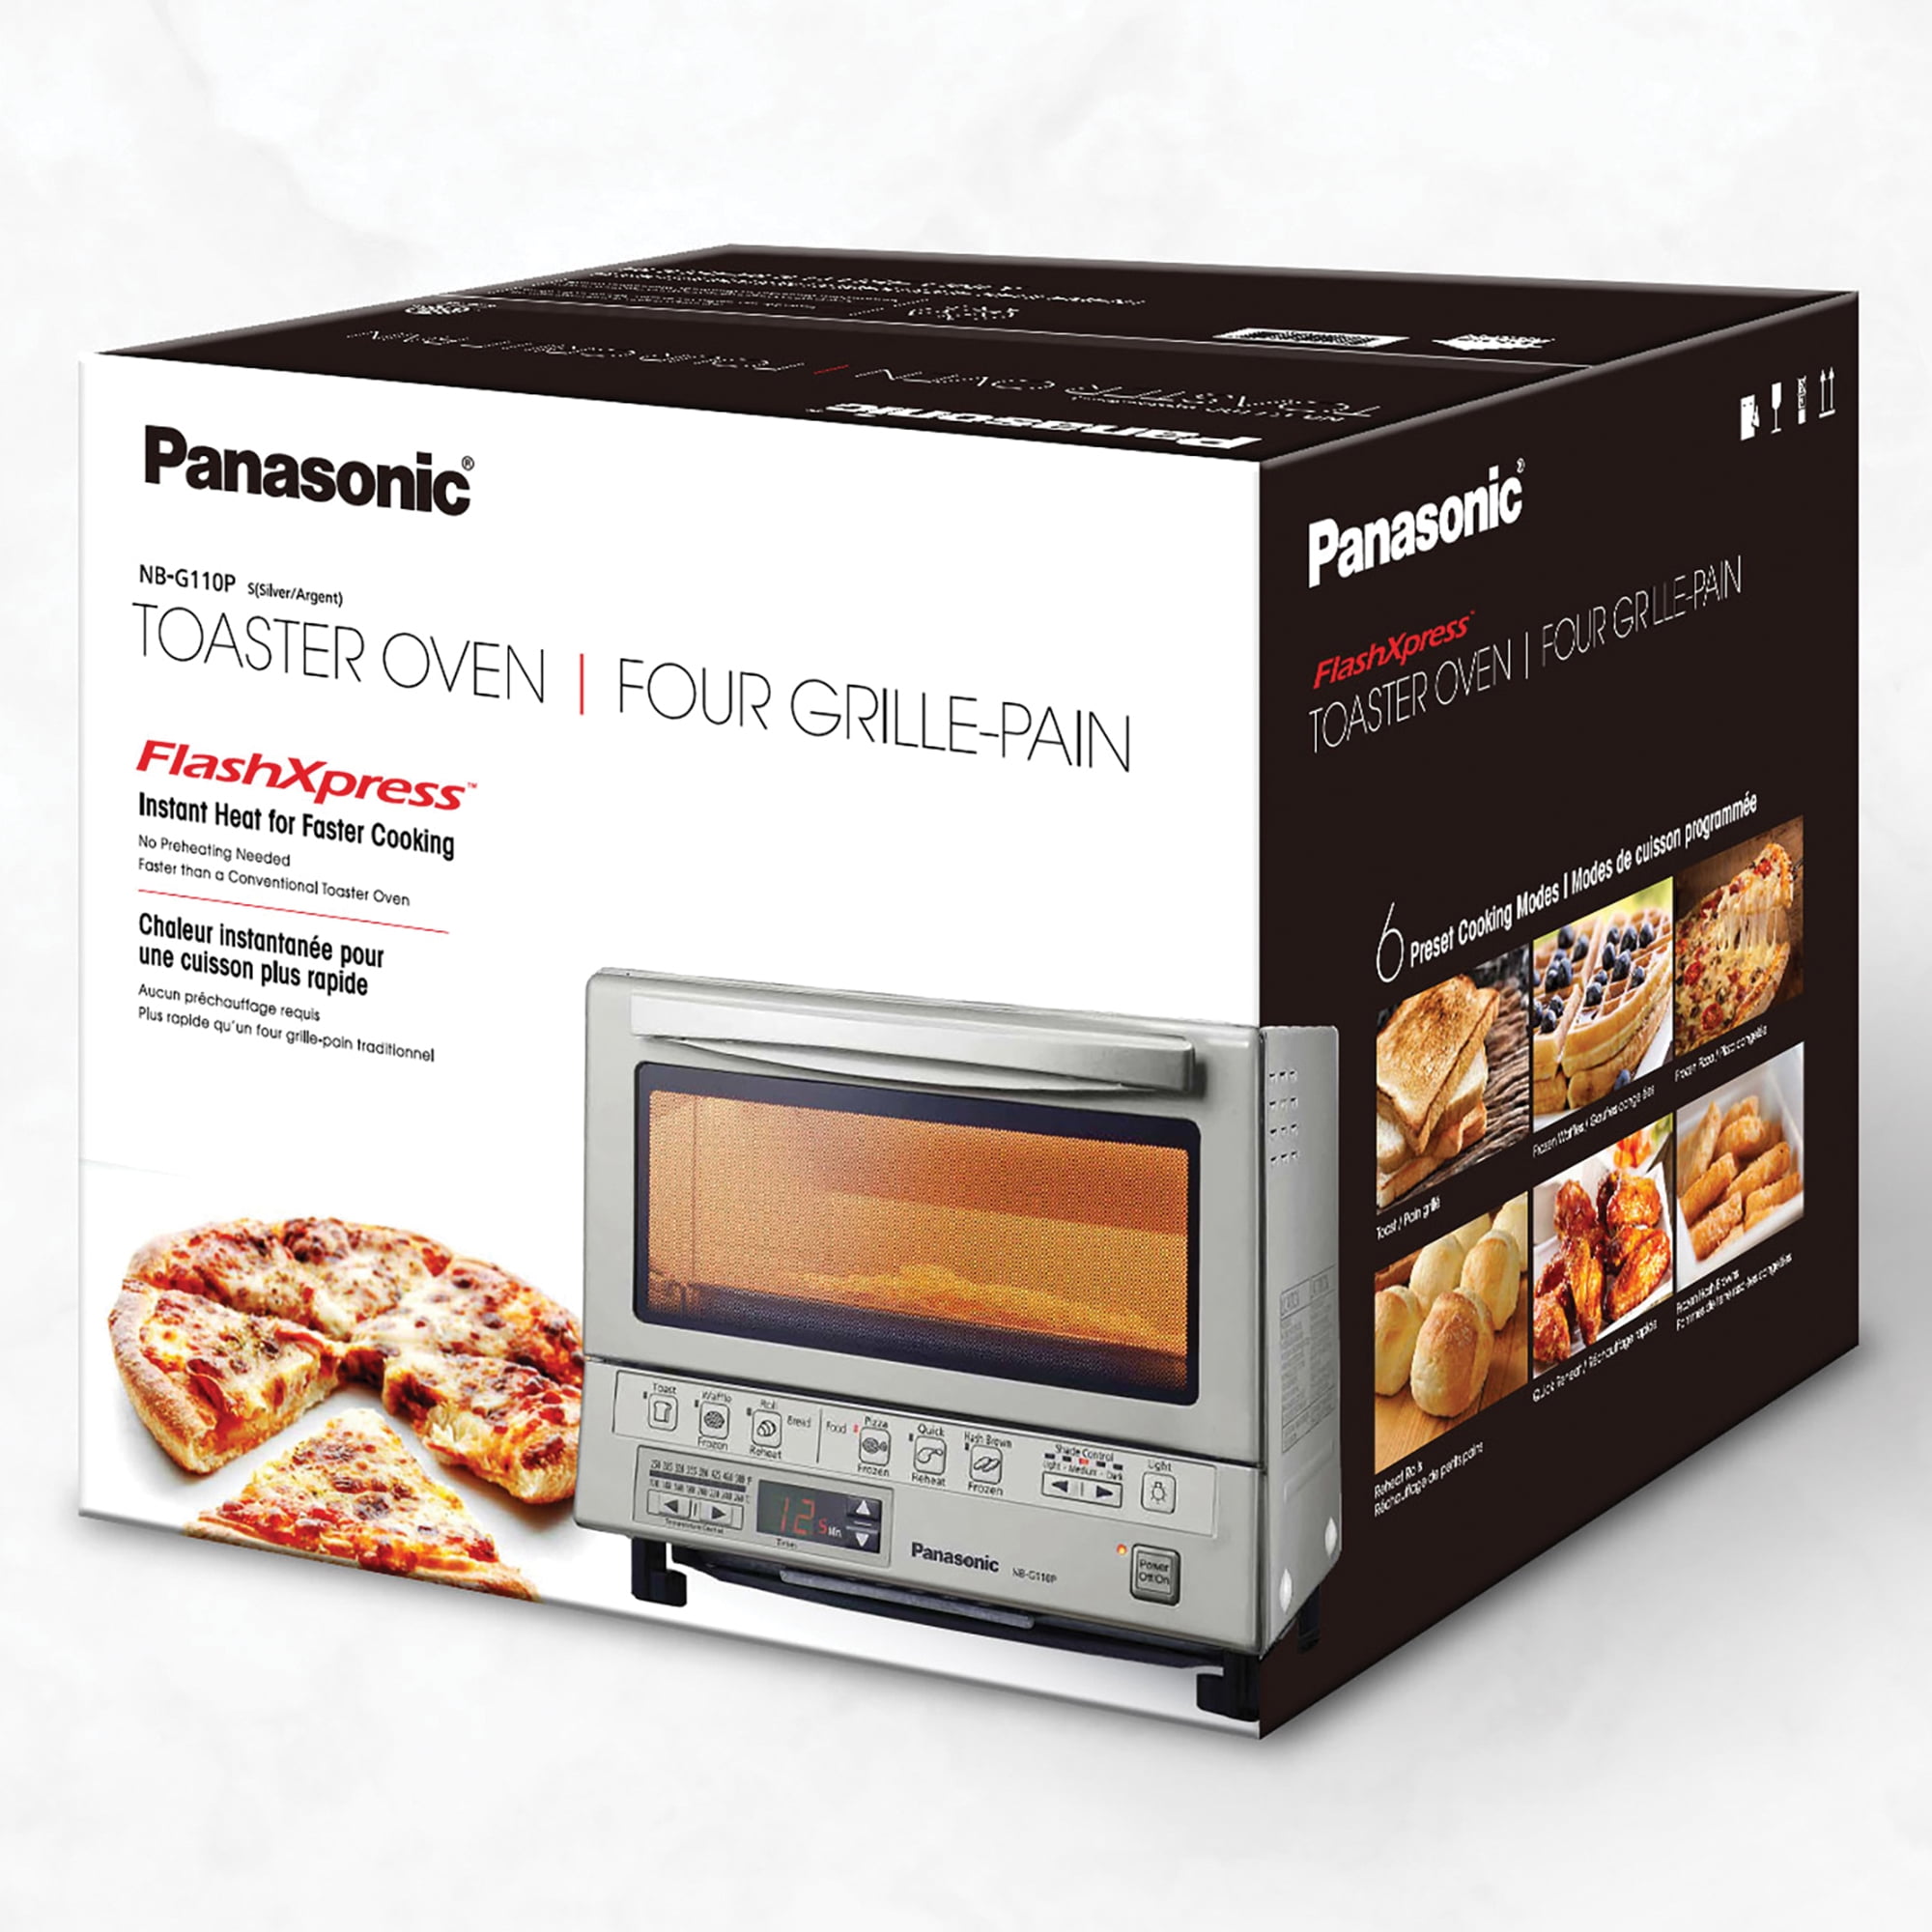 Panasonic FlashXpress Toaster Oven review: The little toaster oven that  could - CNET